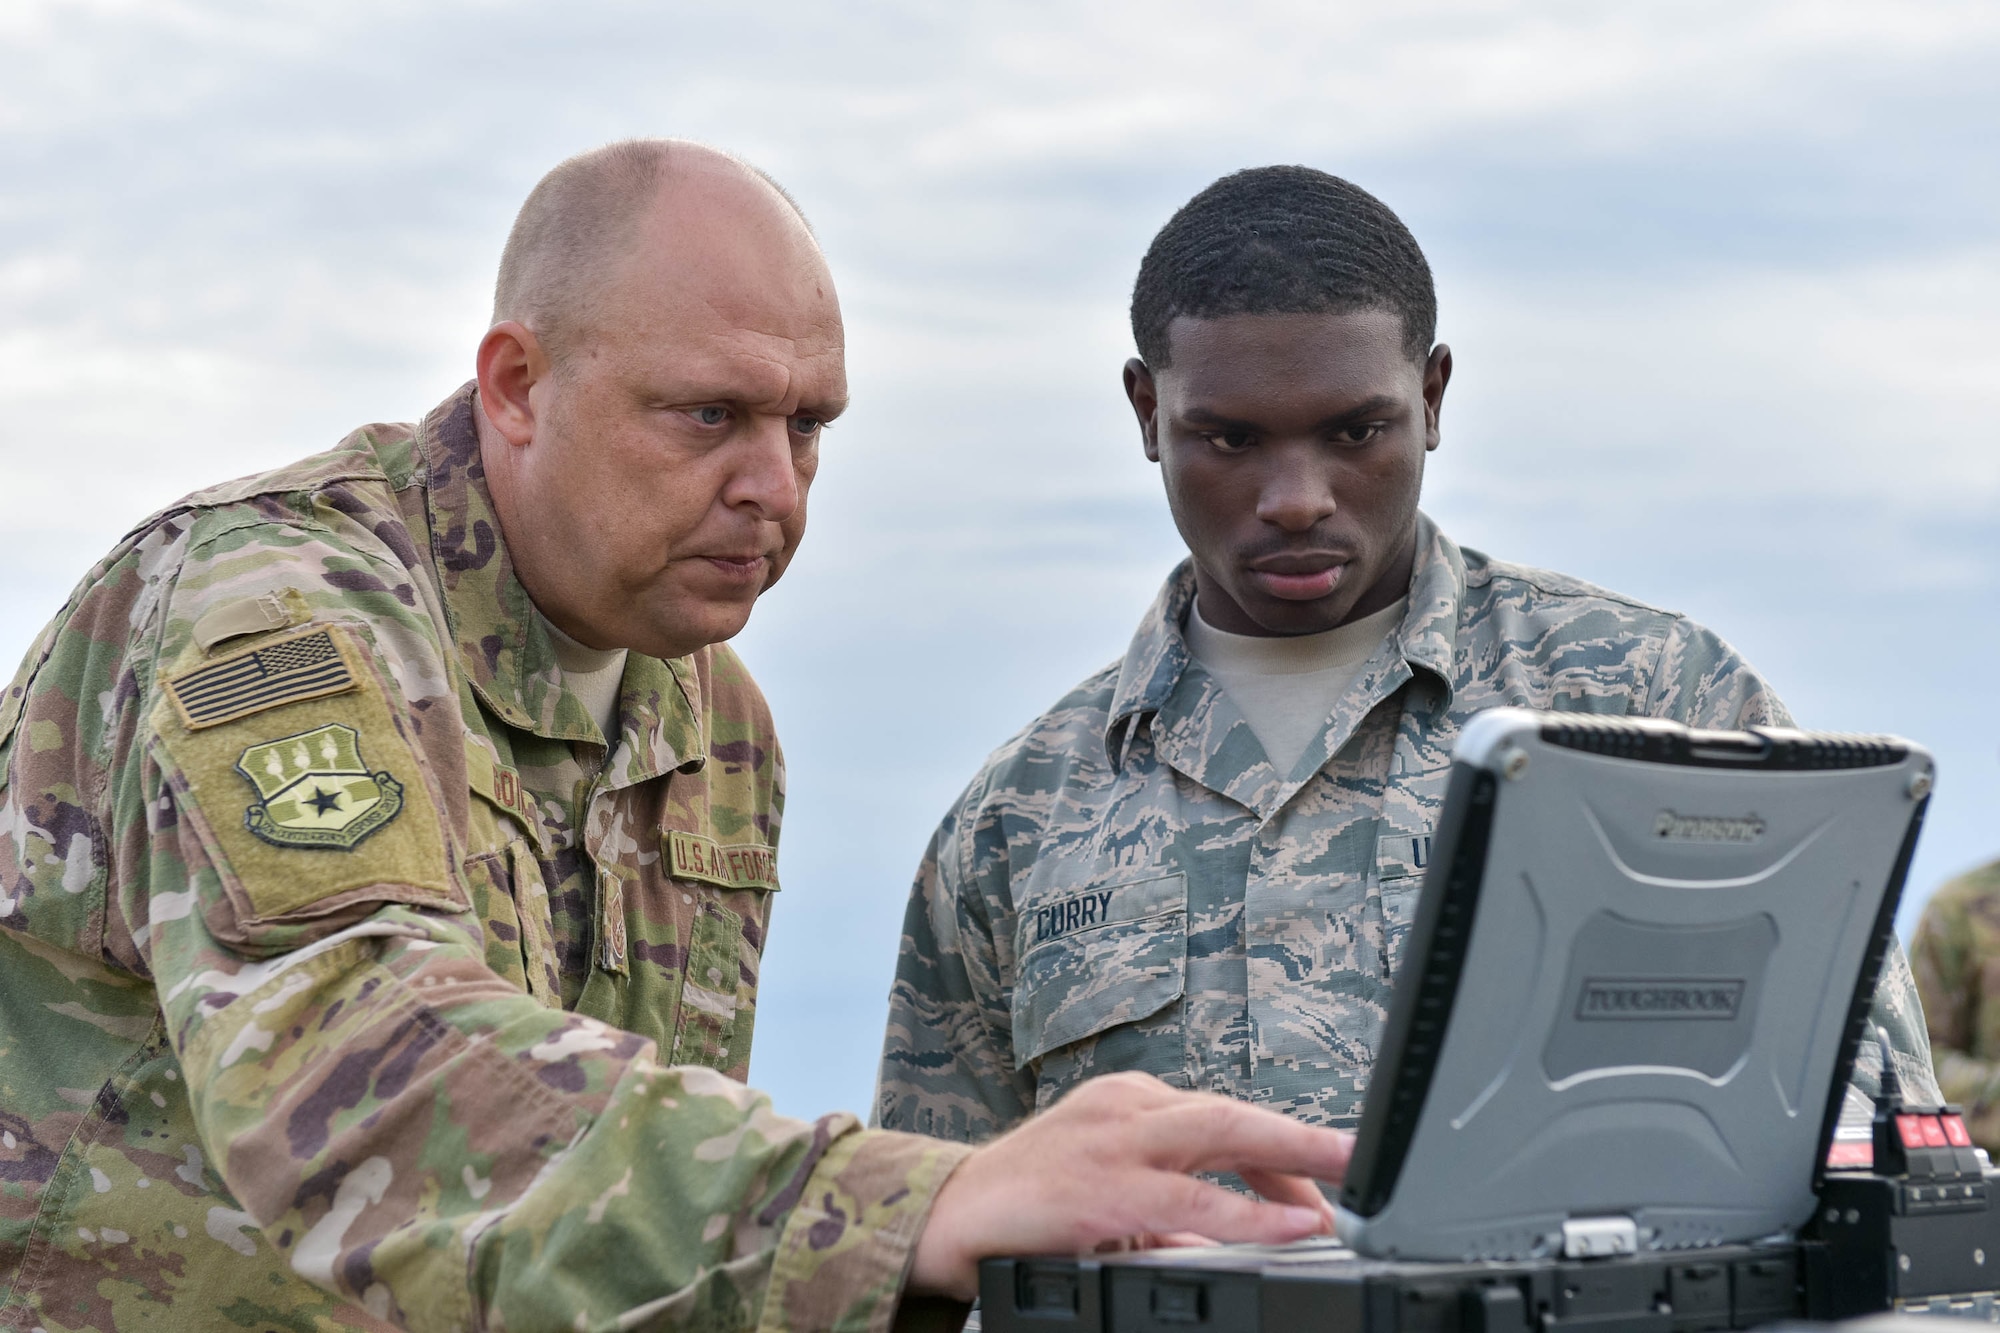 Master Sgt. Kyle Goins (left) and Airman First Class Keontay Curry, both communications specialists assigned to the Kentucky Air National Guard’s 123rd Contingency Response Group, set up computer systems for Operation Huron Thunder at the Alpena Combat Readiness Training Center in Alpena, Mich., July 22, 2018. The 123rd CRG worked in conjunction with the U.S. Army’s 690th Rapid Port Opening Element to operate a Joint Task Force-Port Opening during the exercise. The objective of the JTF-PO is to establish a complete air logistics hub and surface distribution network. (U.S. Air National Guard photo by Maj. Allison Stephens)